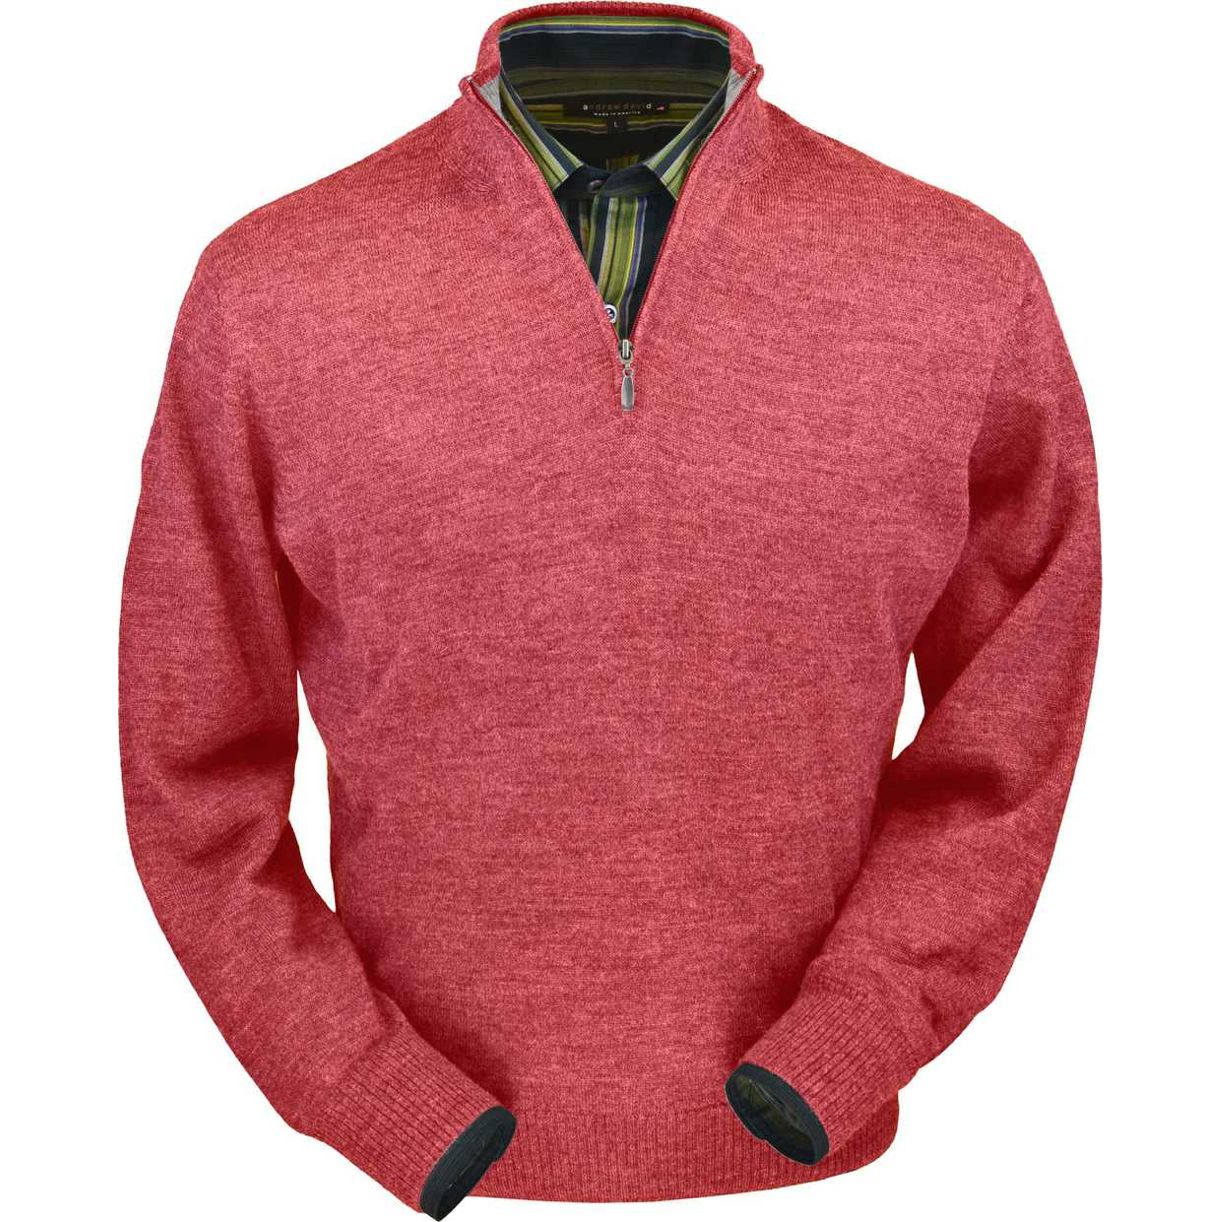 Royal Alpaca Half-Zip Mock Neck Sweater in Red Coral Heather by Peru Unlimited